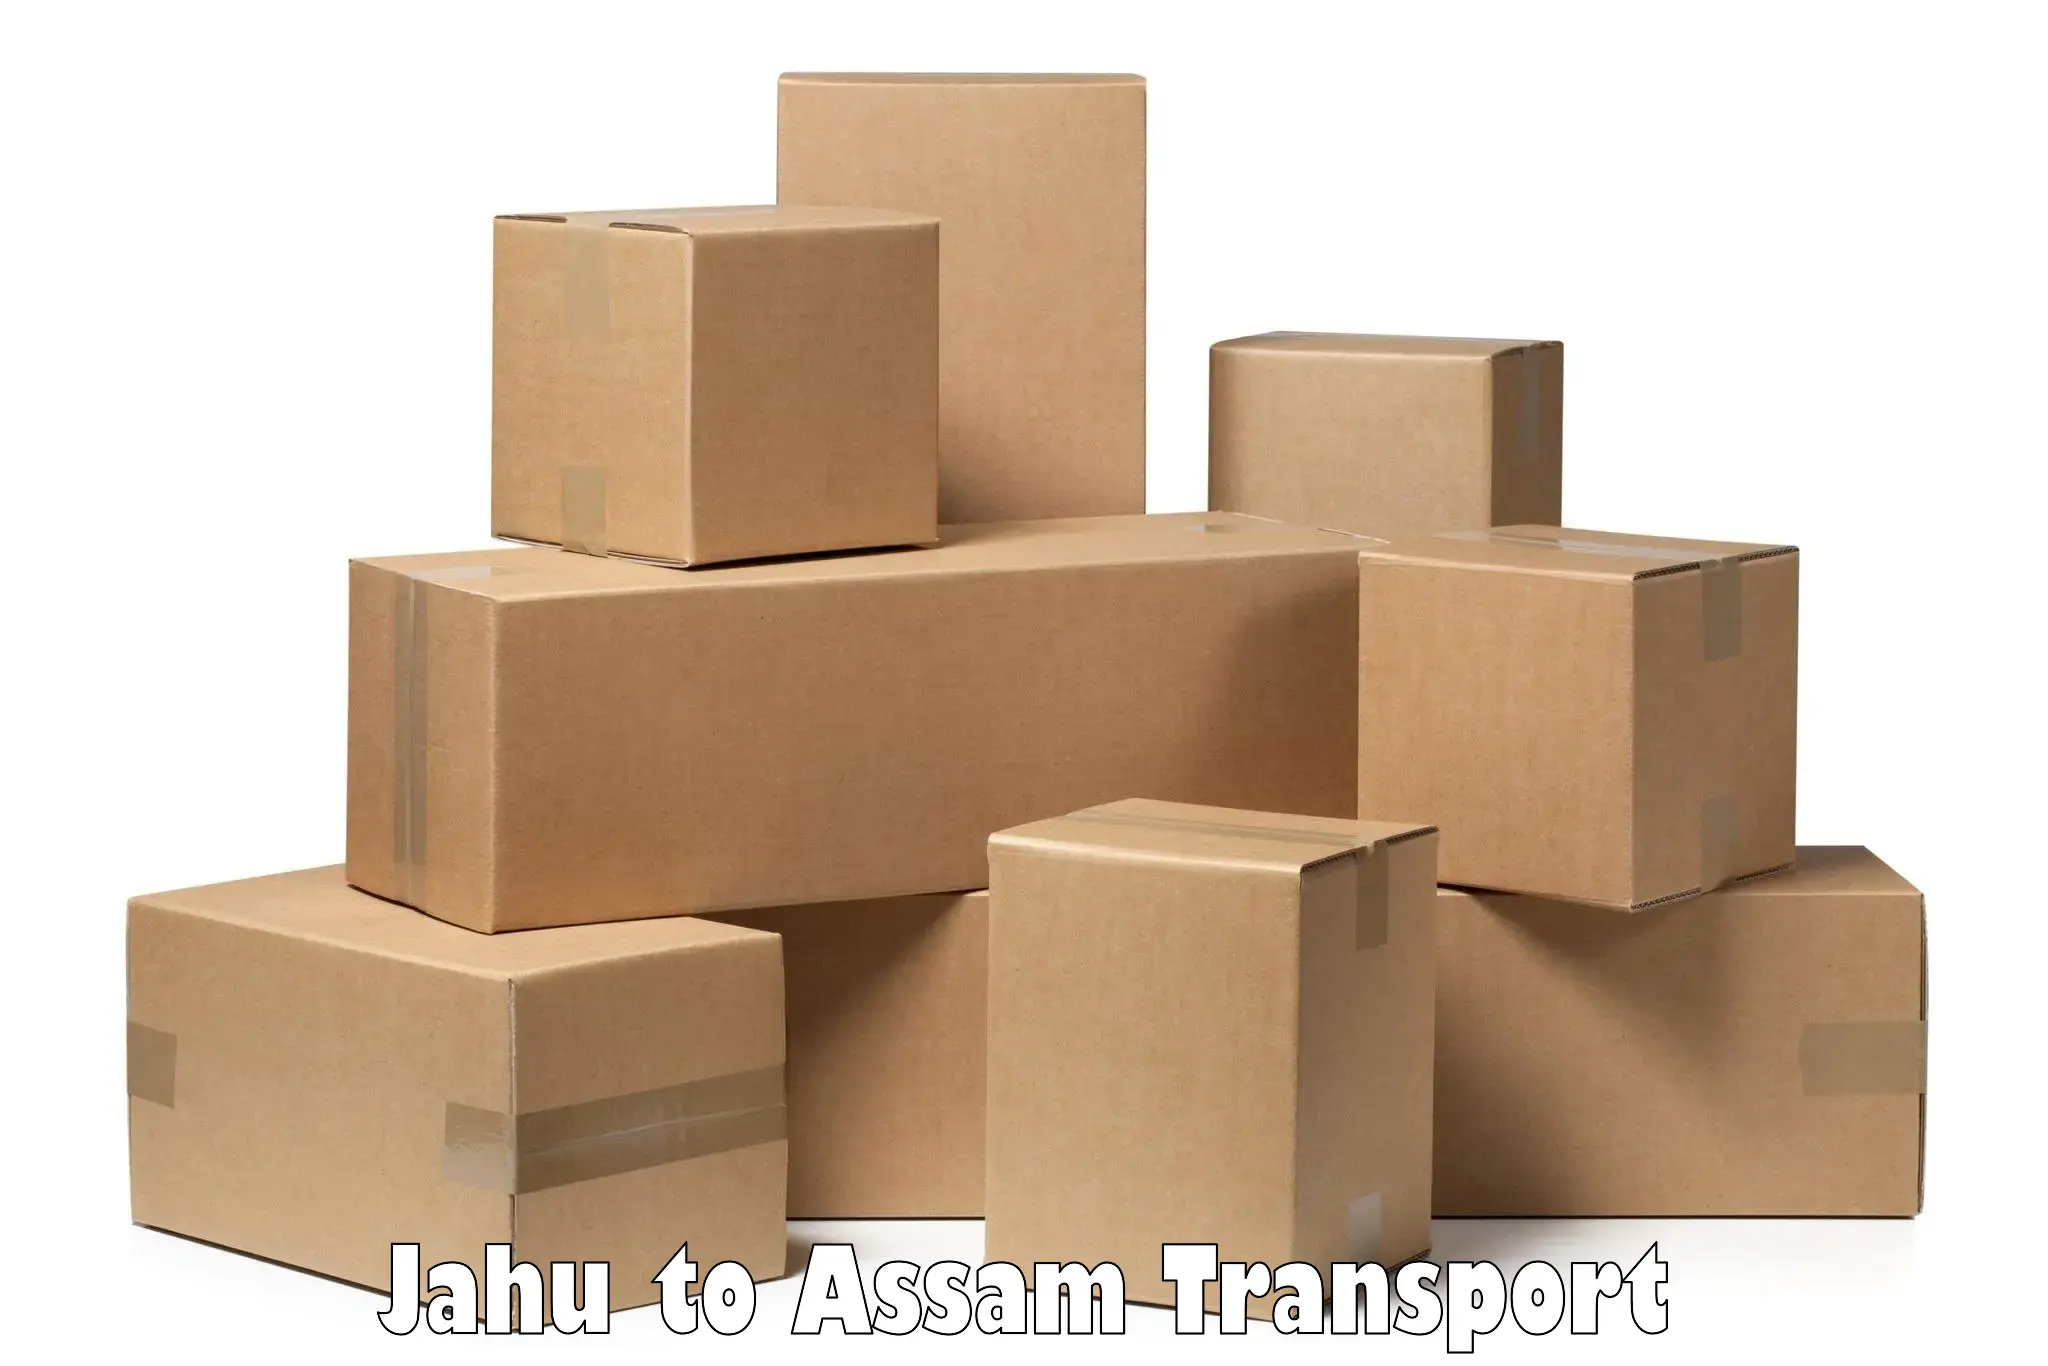 Truck transport companies in India Jahu to Rupai Siding